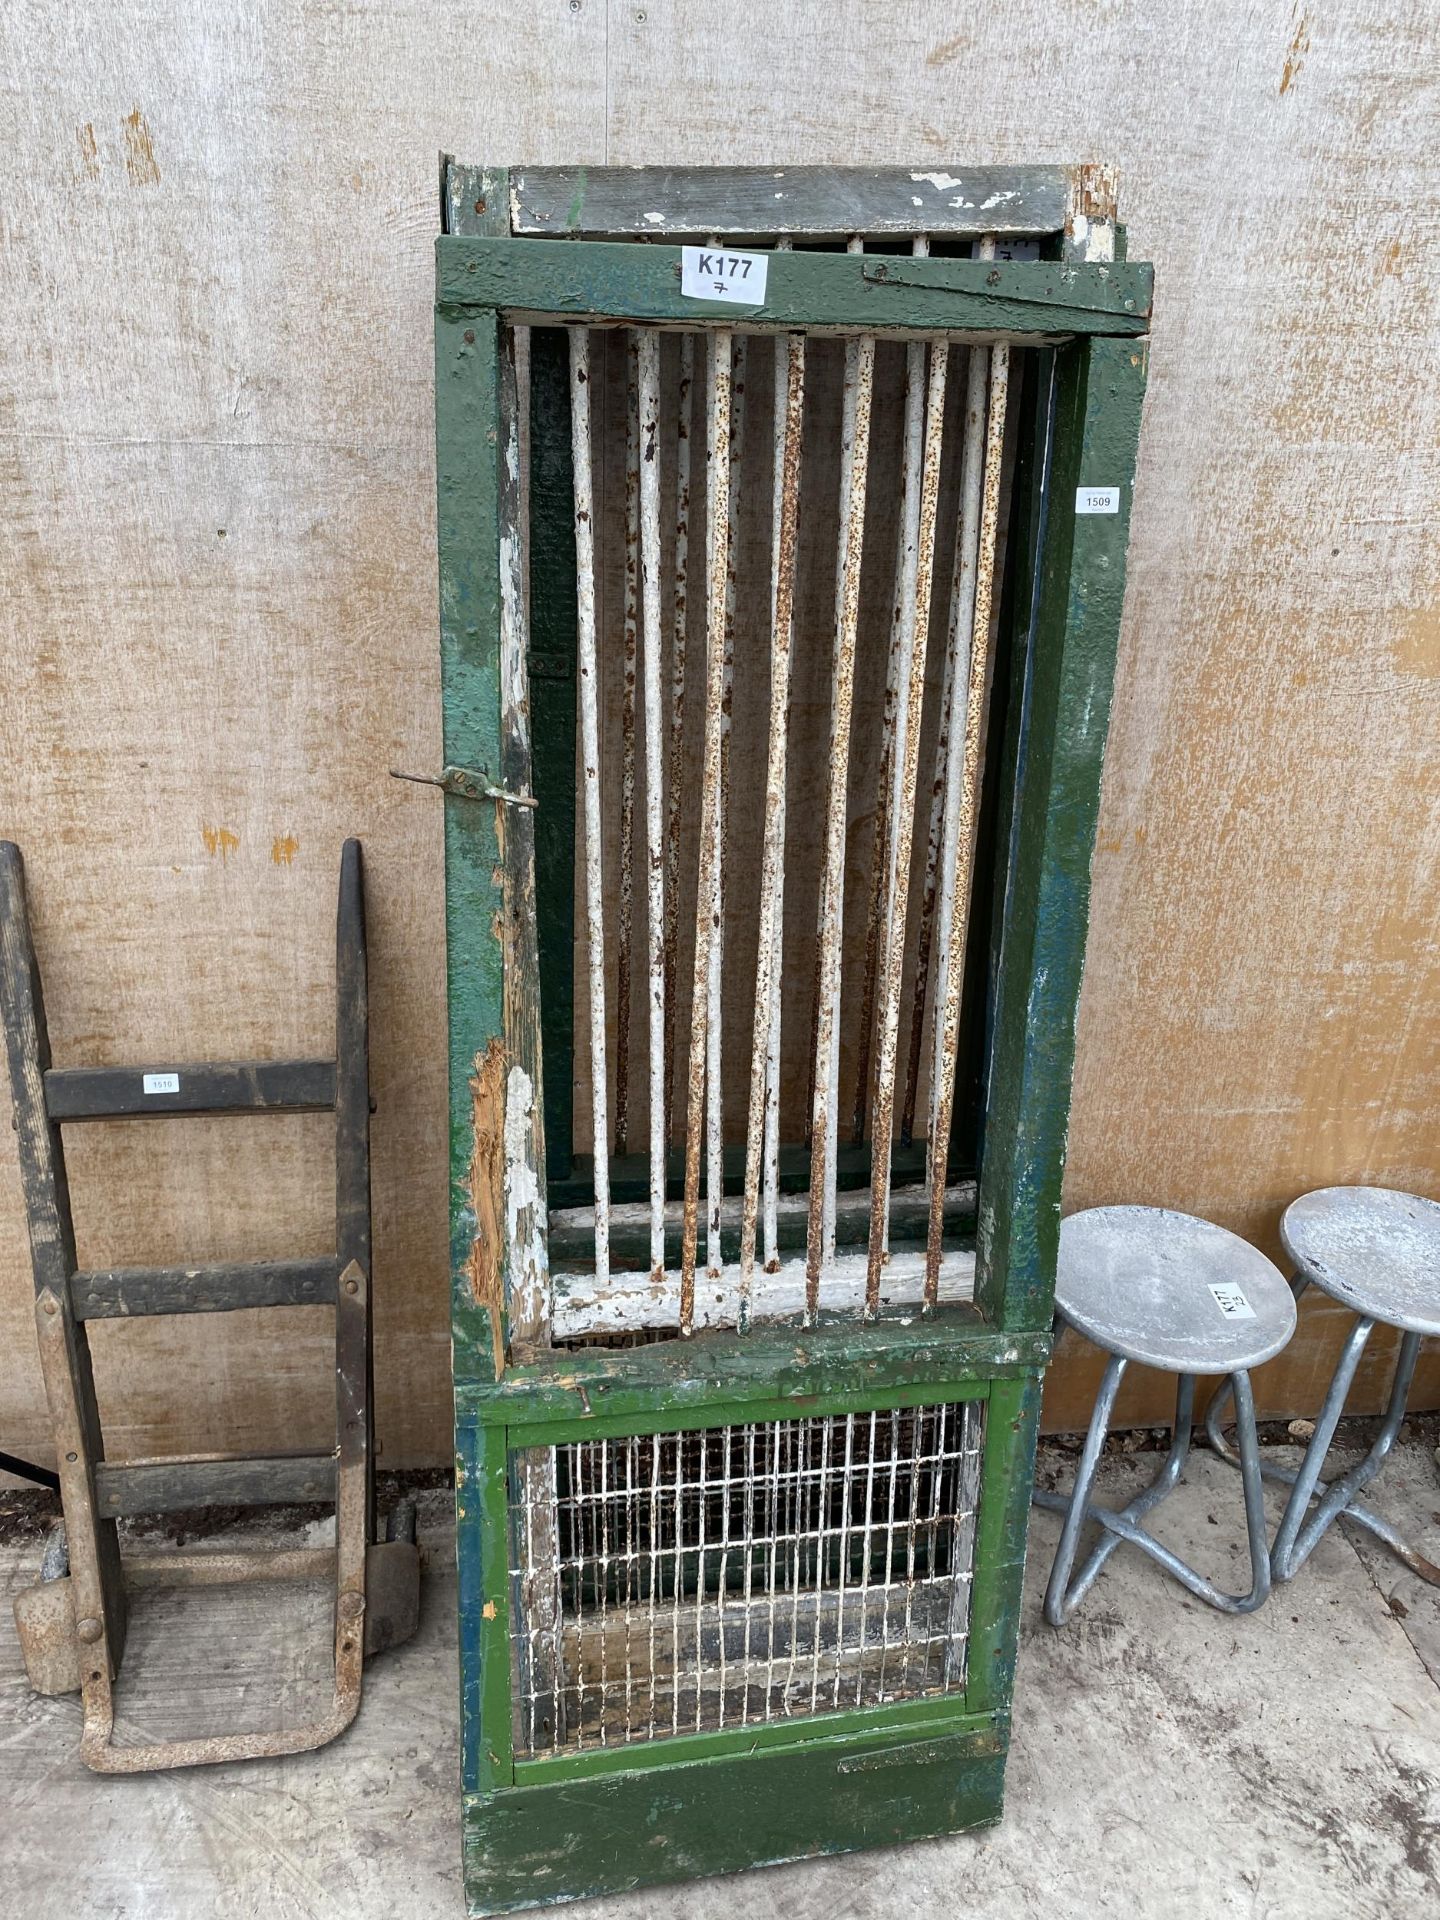 FOUR VINTAGE WOODEN DOORS WITH MESH BOTTOM SECTION AND STEEL BARS TO THE TOP SECTION